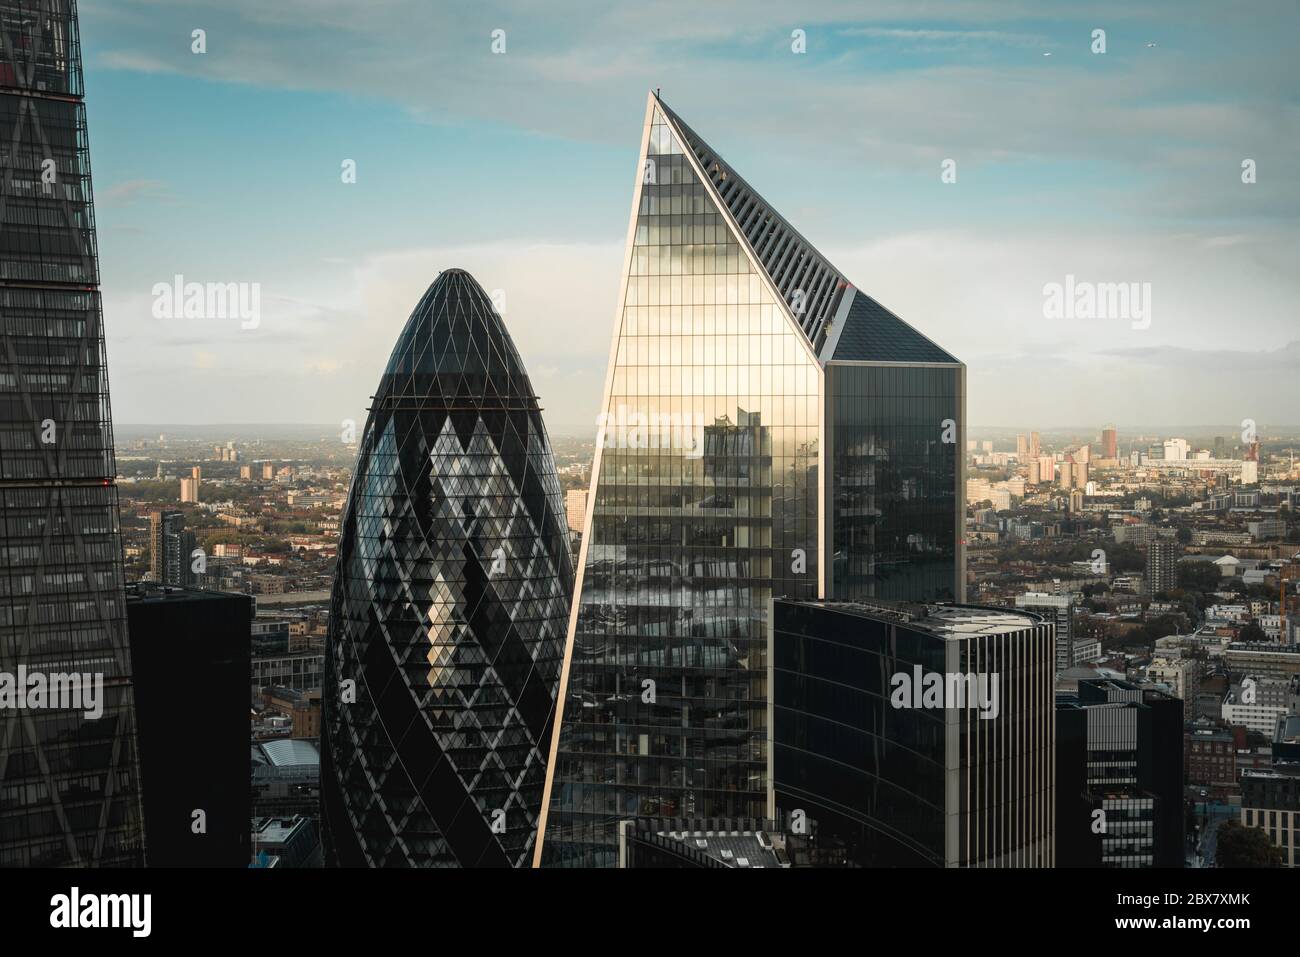 View of the 30 St. Mary Axe and the Scalpel buildings from Sky Garden during sunset in London, UK Stock Photo